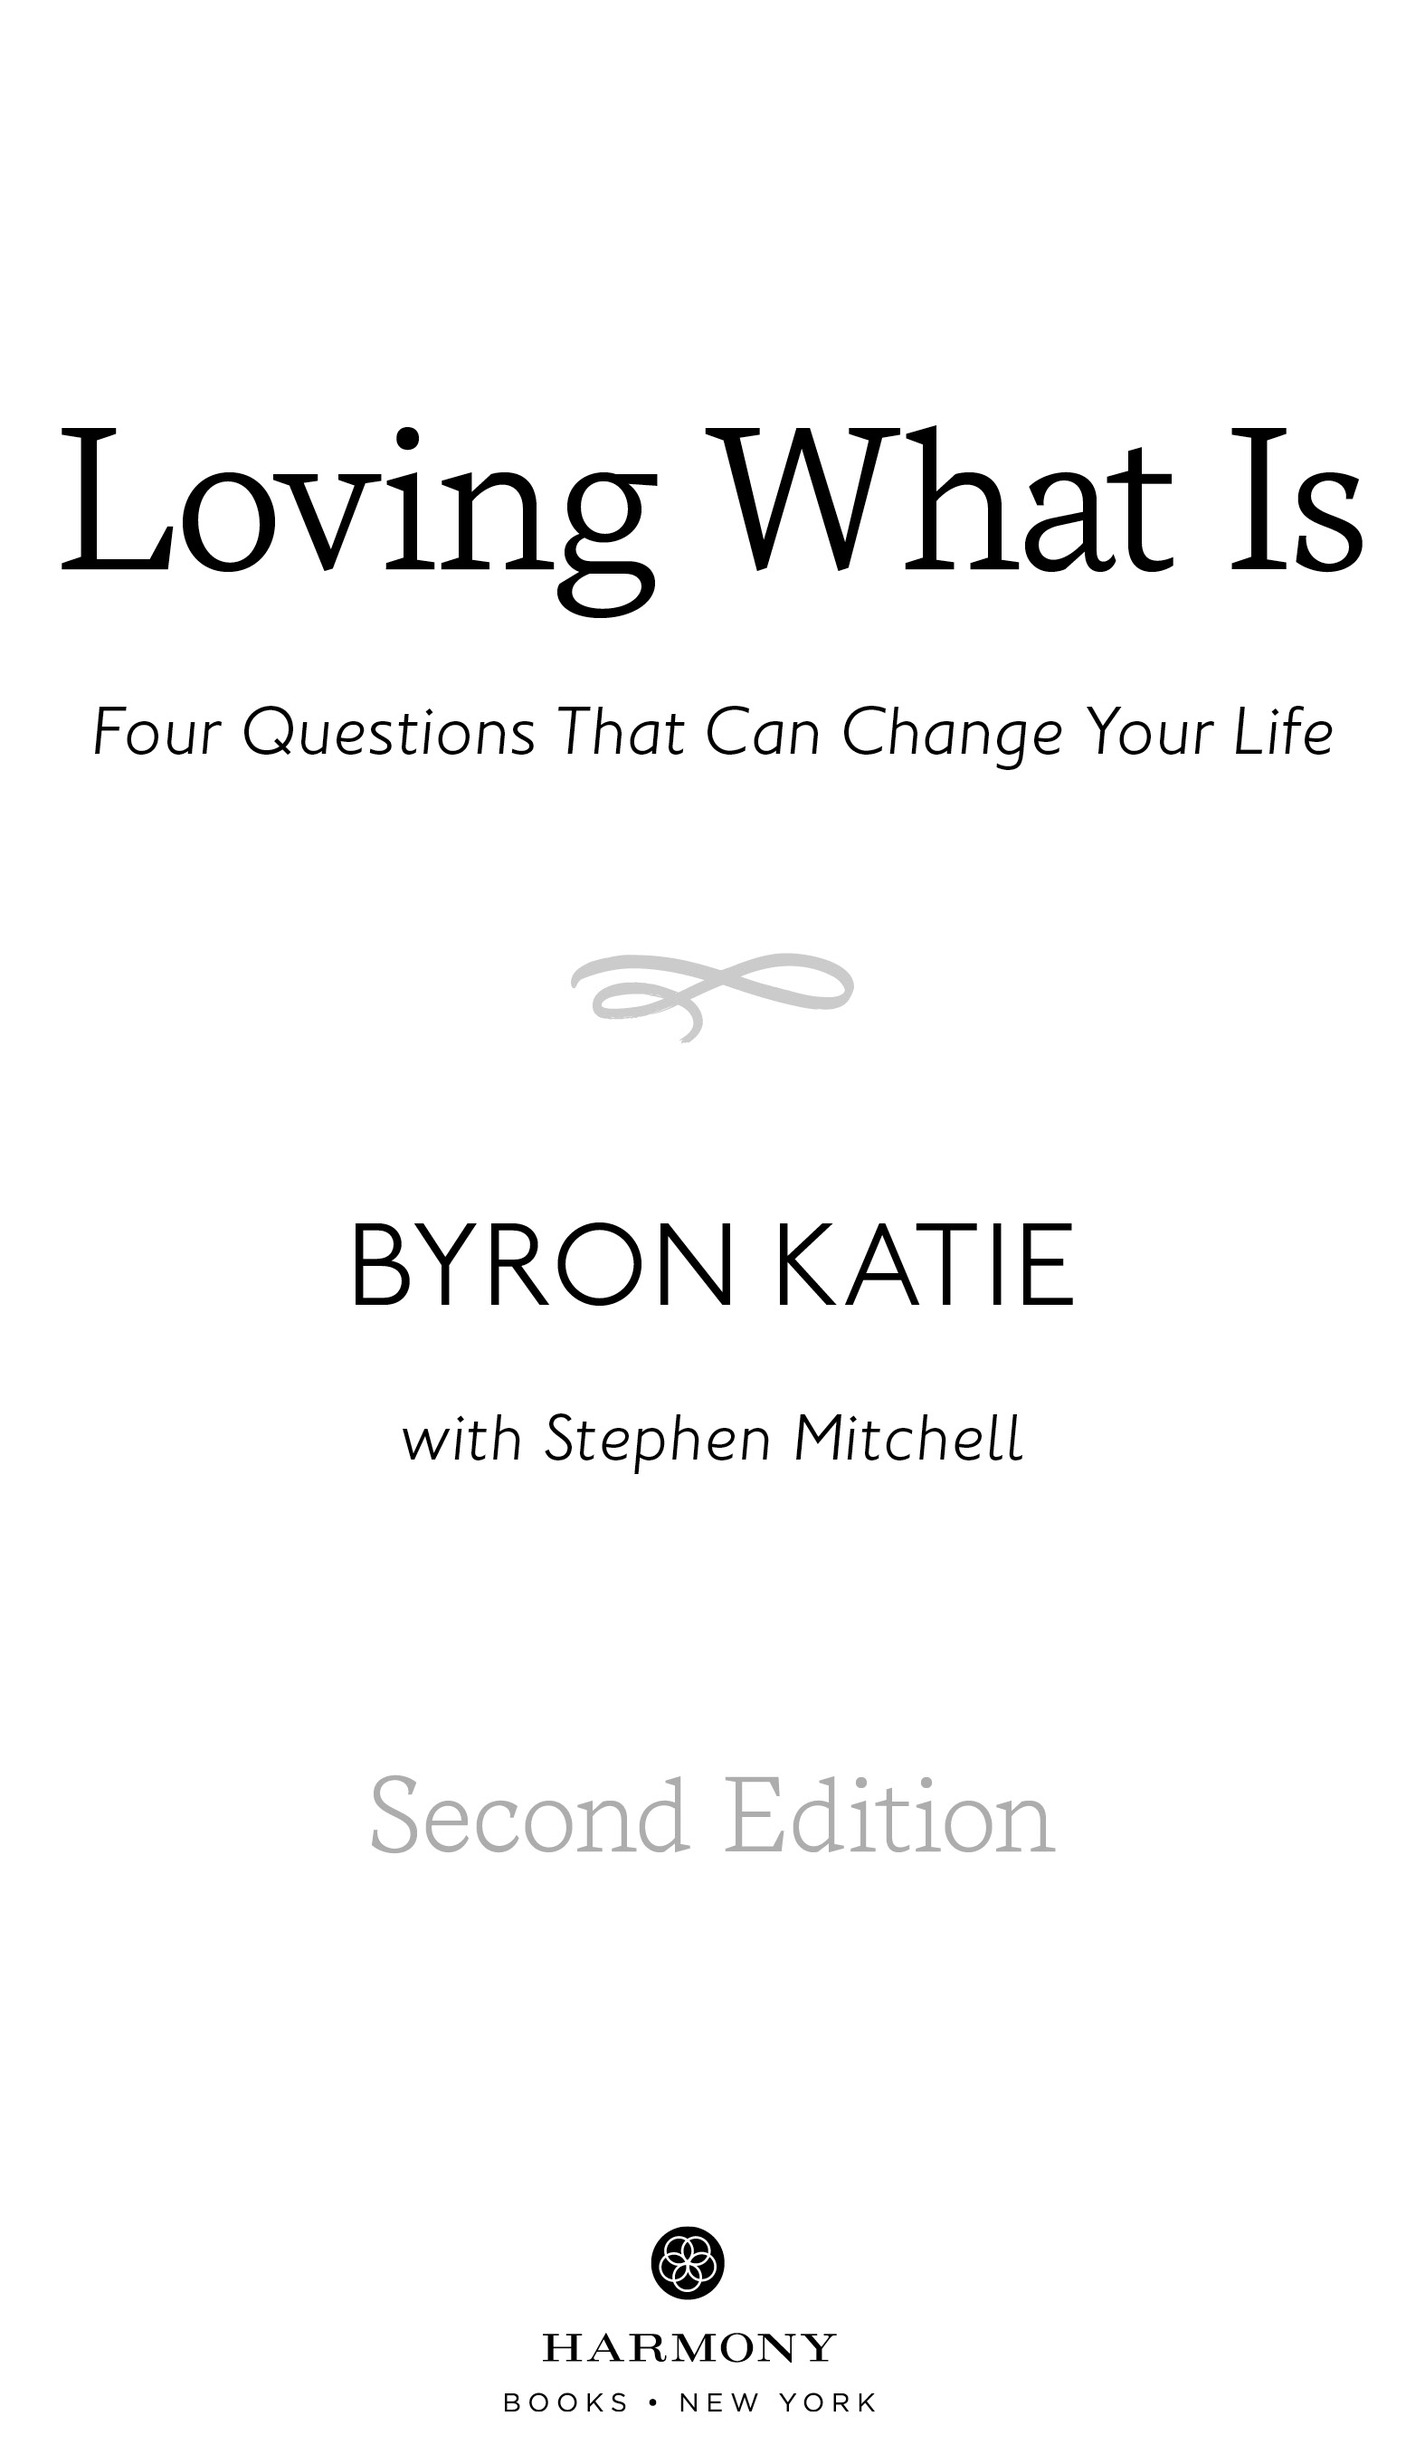 Book Title, Loving What Is, Revised Edition, Subtitle, Four Questions That Can Change Your Life, Author, Byron Katie and Stephen Mitchell, Imprint, Harmony